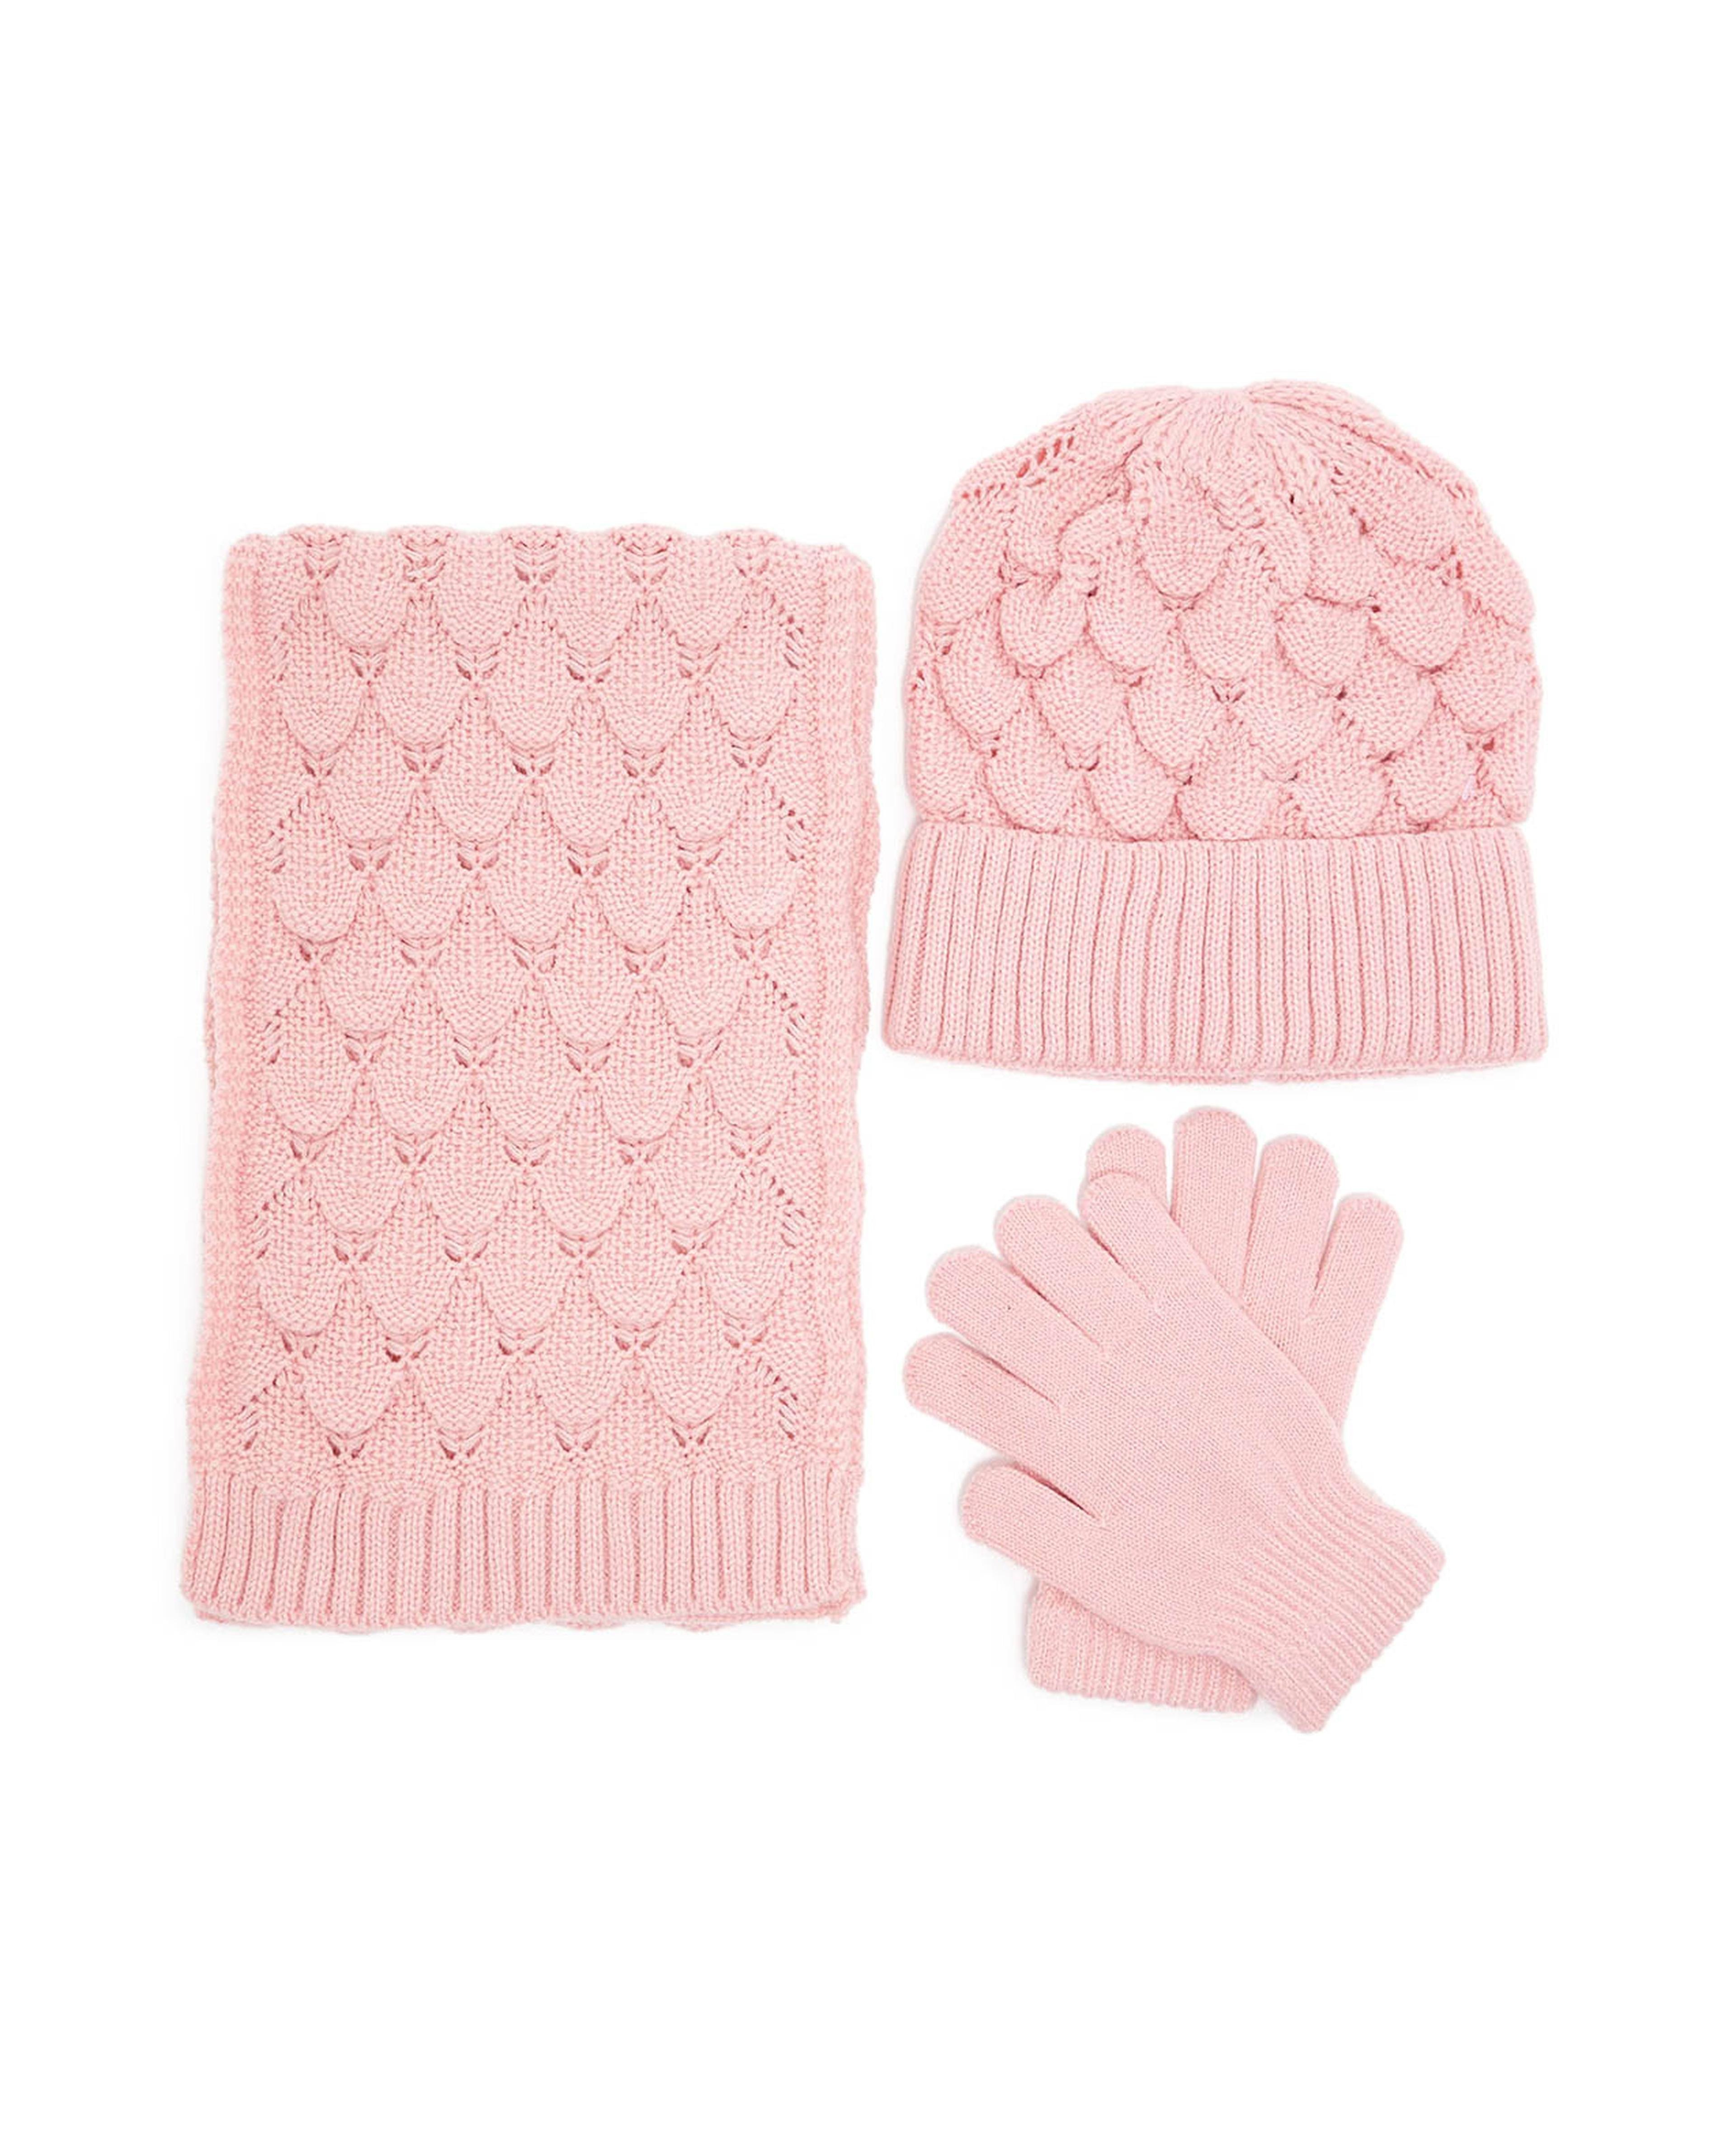 Feather Lace Knit Cap, Gloves and Muffler Set